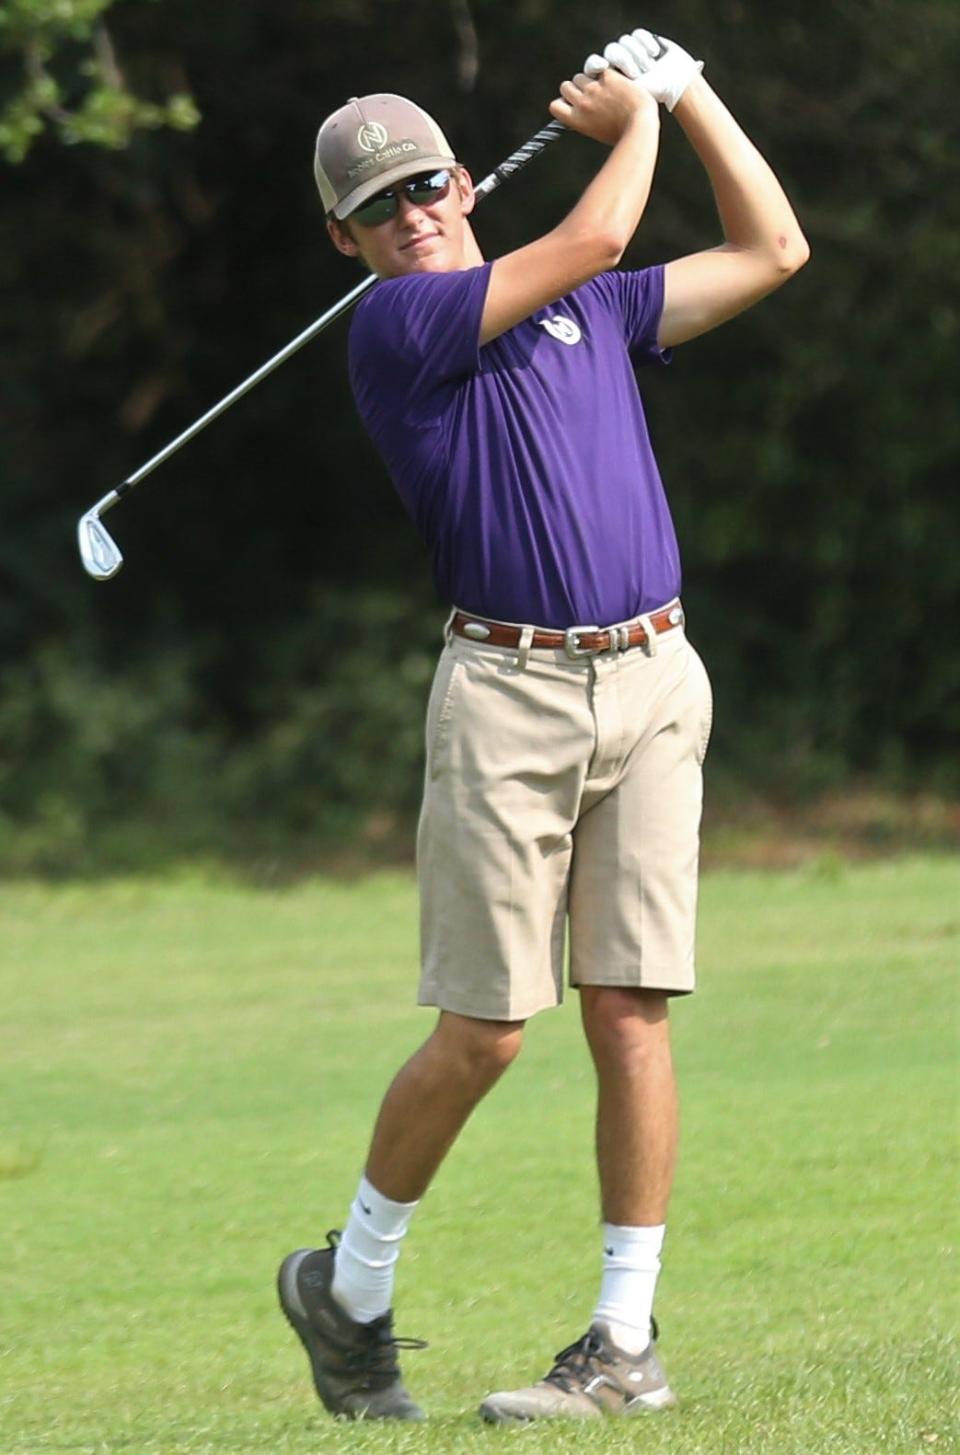 Mason High School's Cy Nobles hits a tee shot during the first round of the UIL Class 2A Boys State Golf Tournament at Lions Municipal Golf Course in Austin on Monday, May 9, 2022.